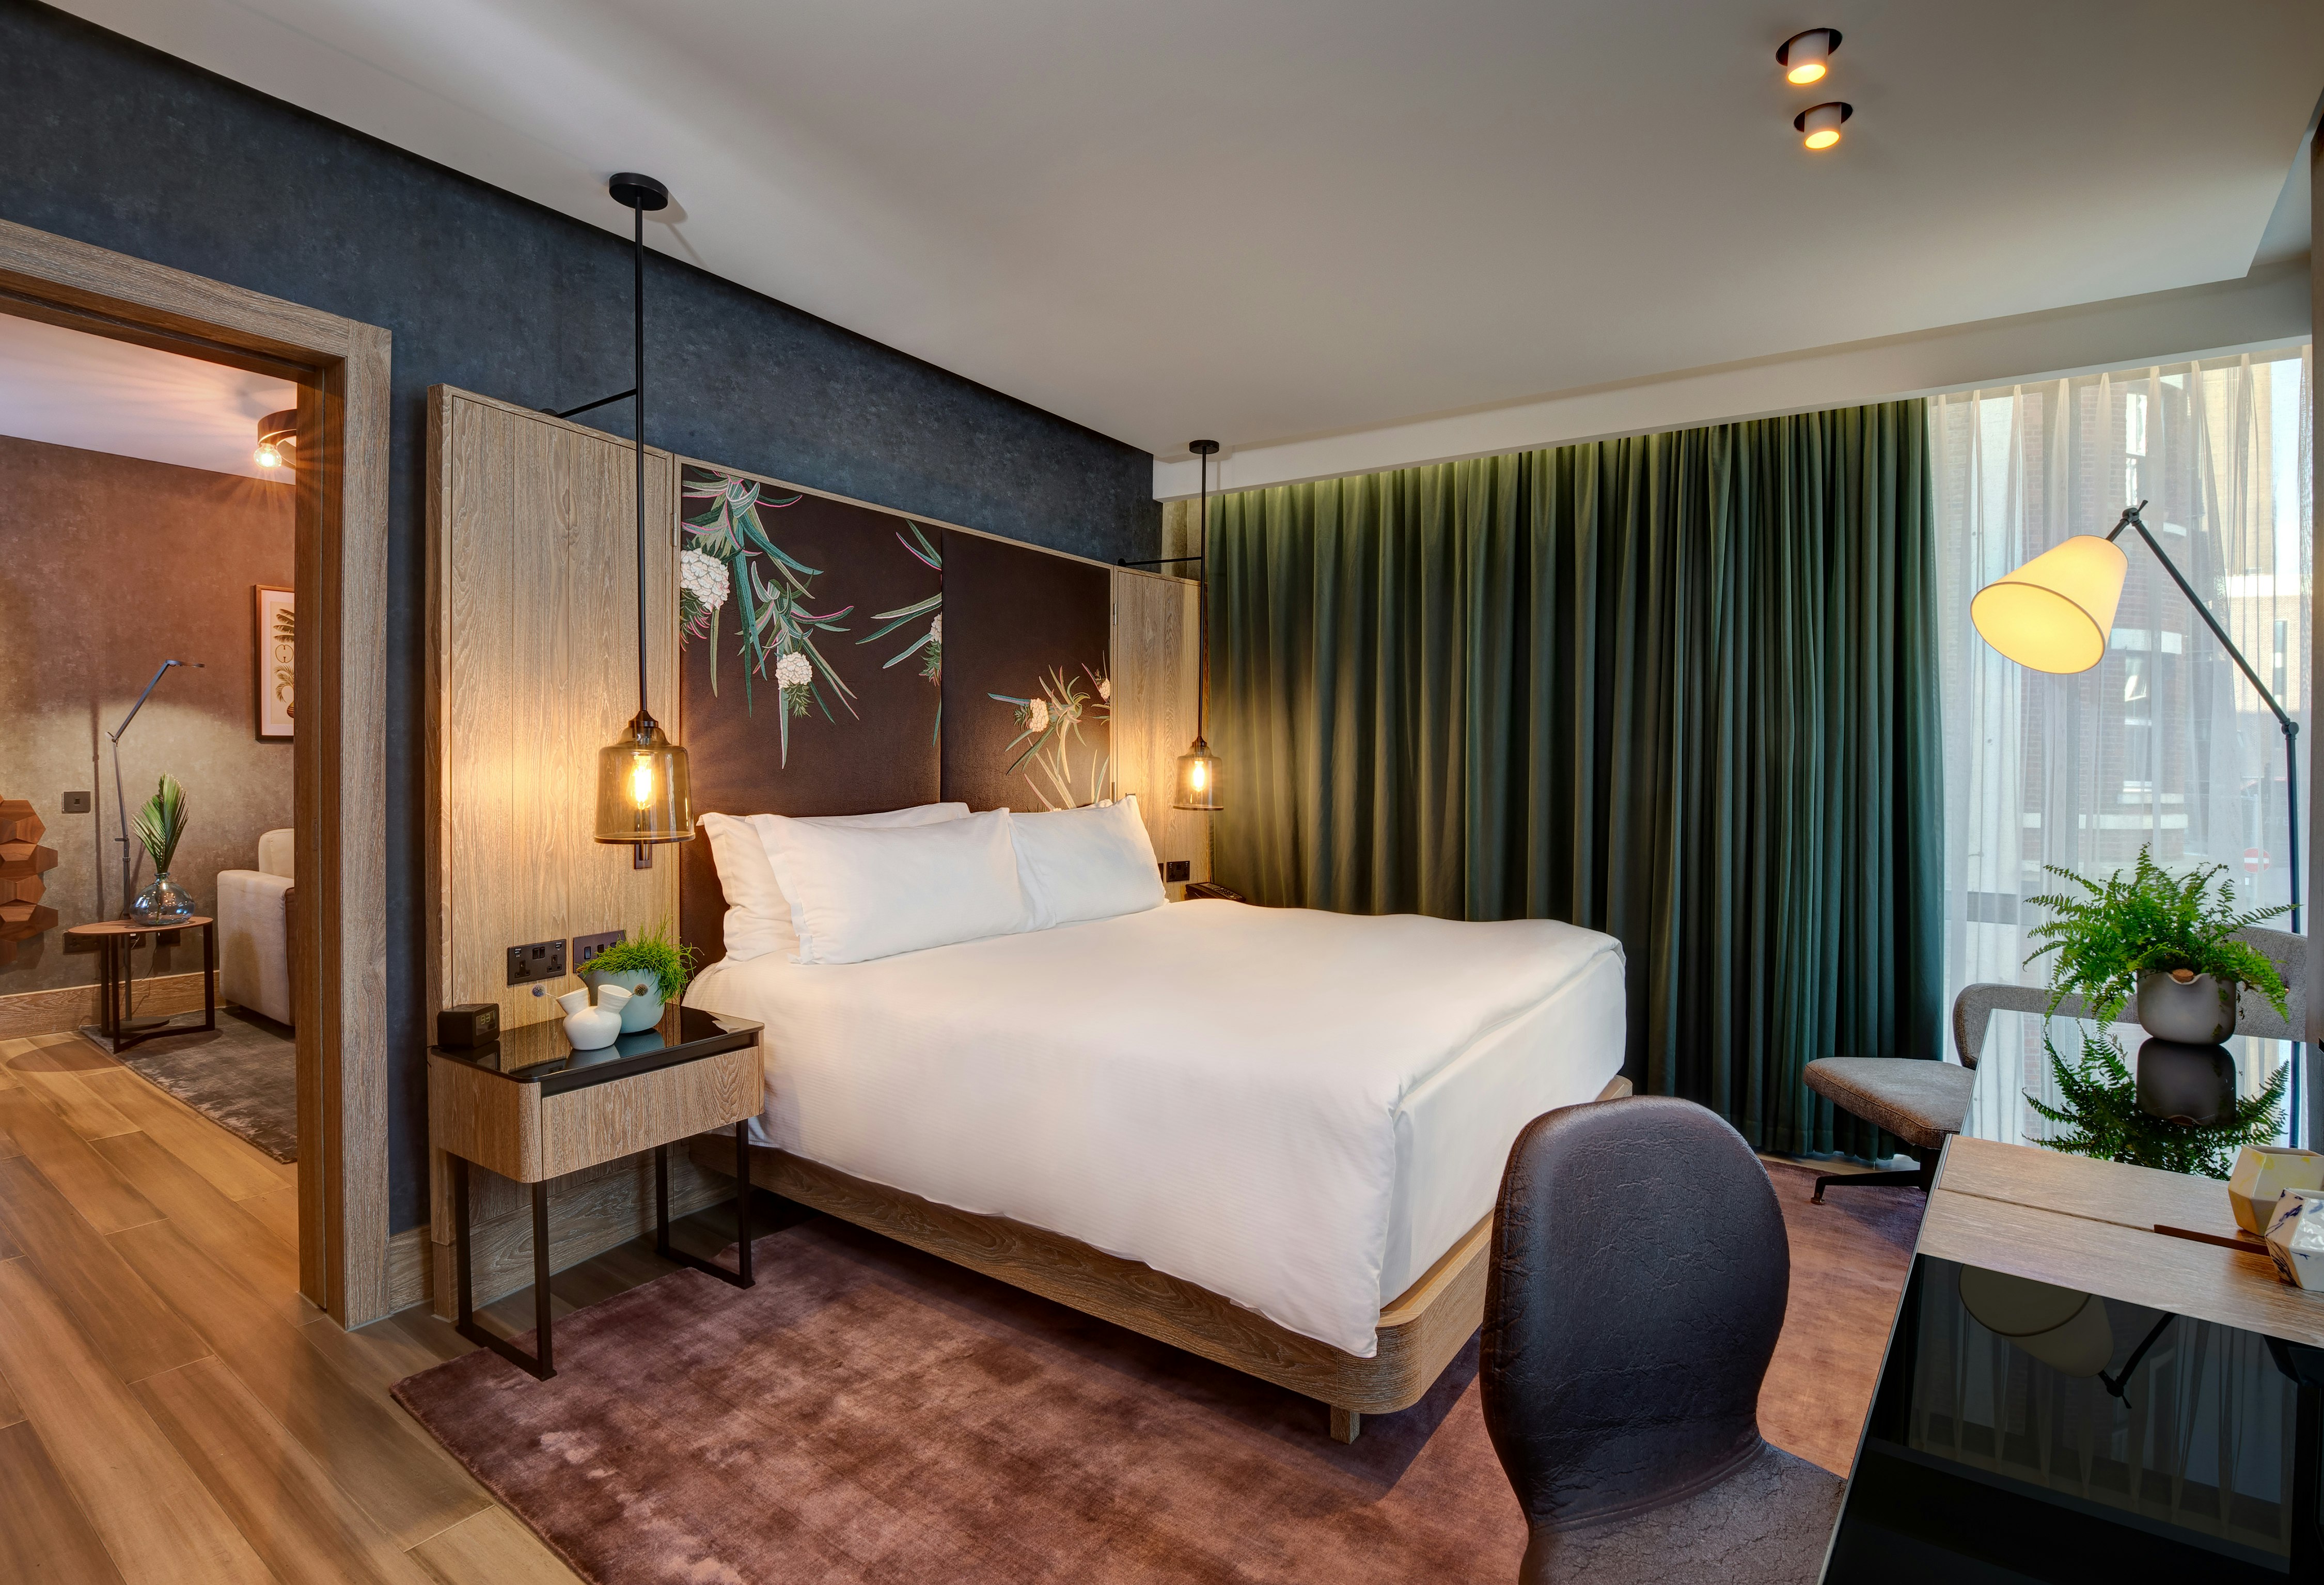 Exterior shot of a hotel room at the Hilton London Bankside. There's a bed covered in white covers and pillows, a wooden side table, a wooden chair and a wooden desk. There is a green curtain hanging over the large window. 